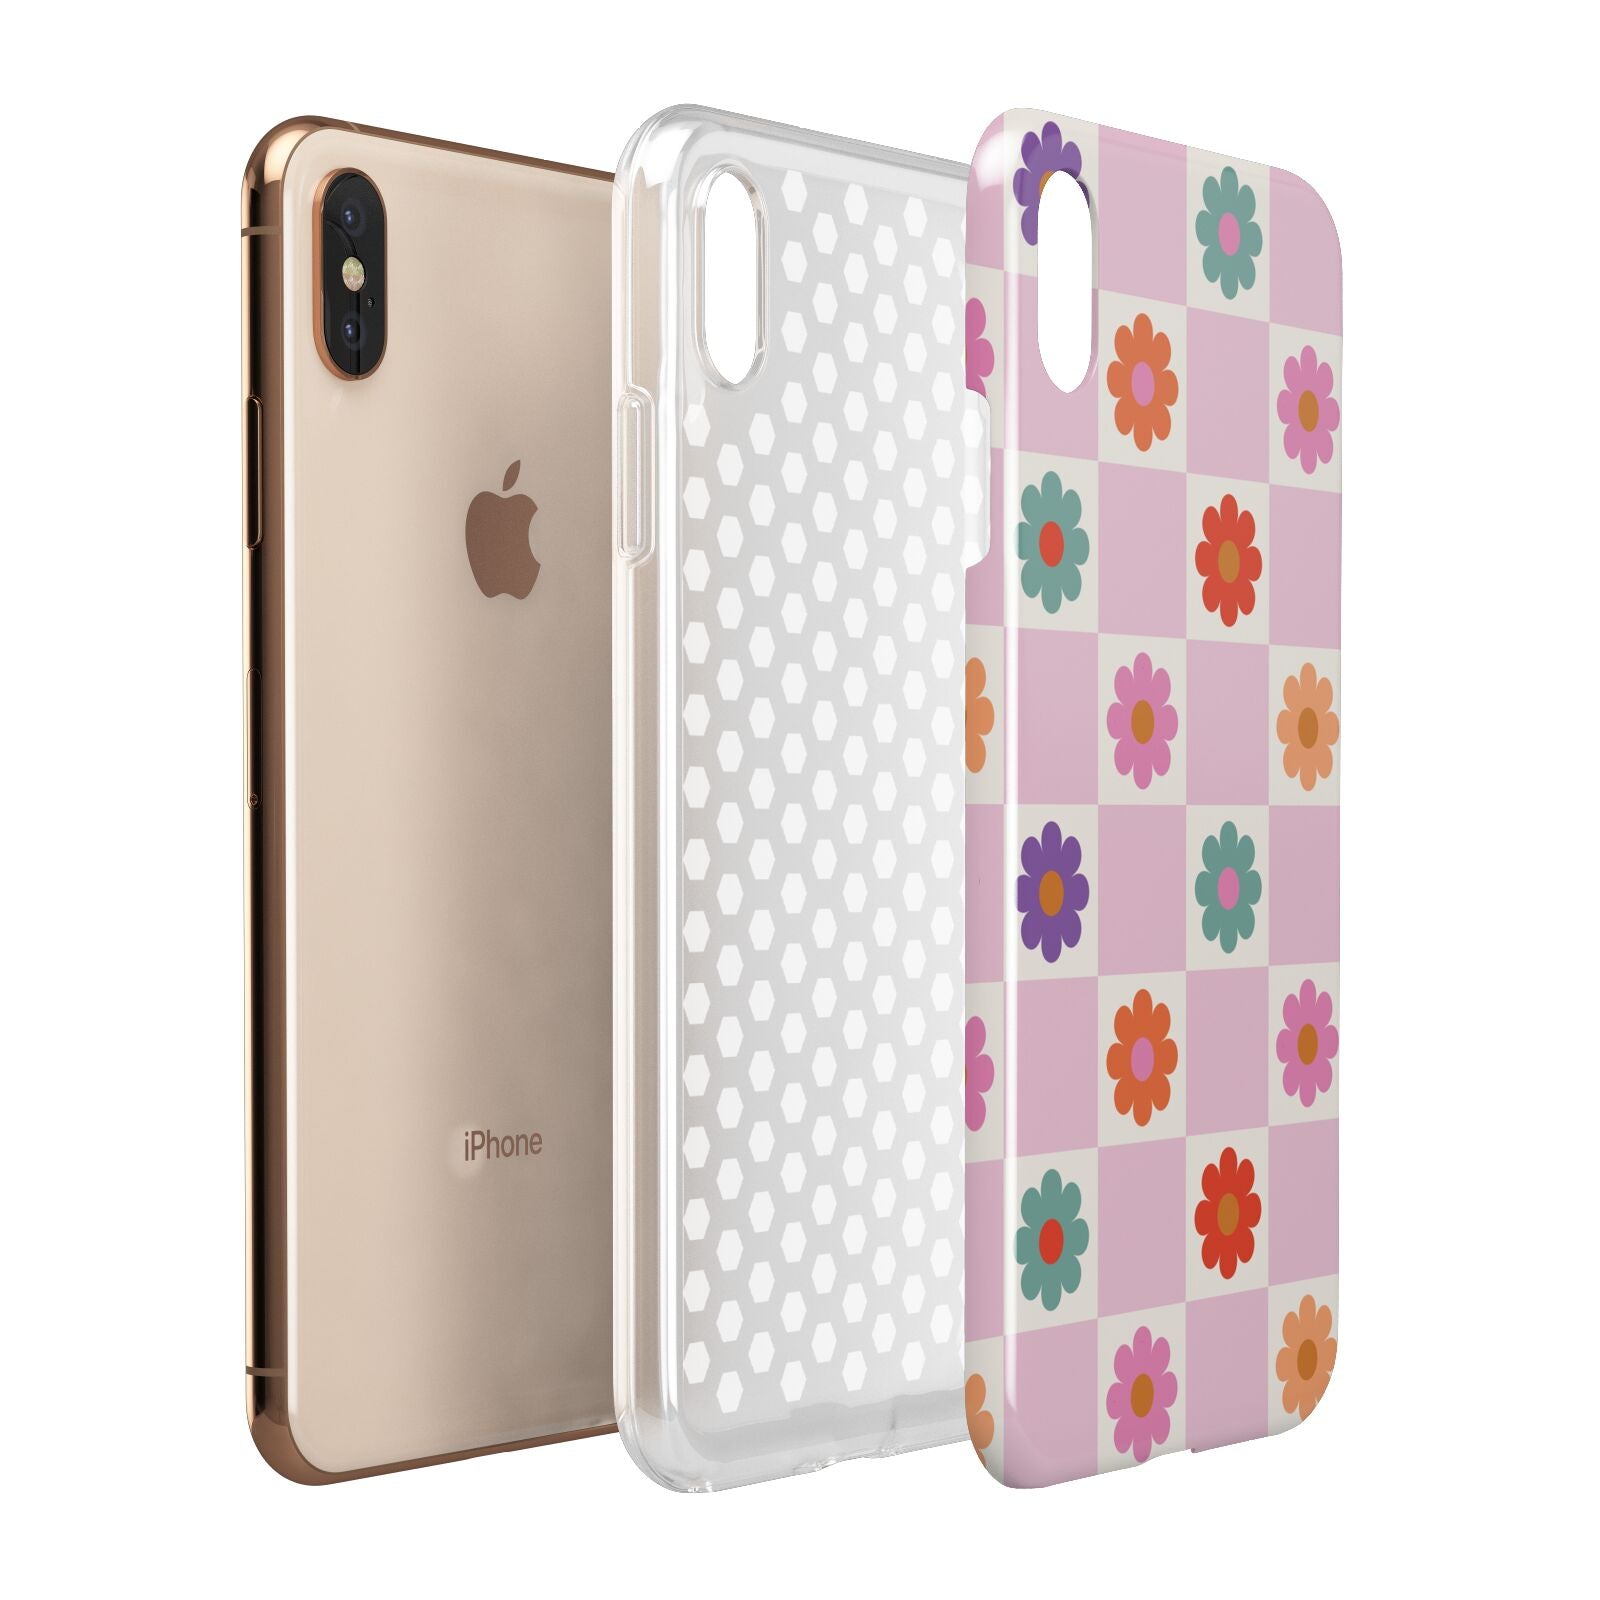 Checked flowers Apple iPhone Xs Max 3D Tough Case Expanded View